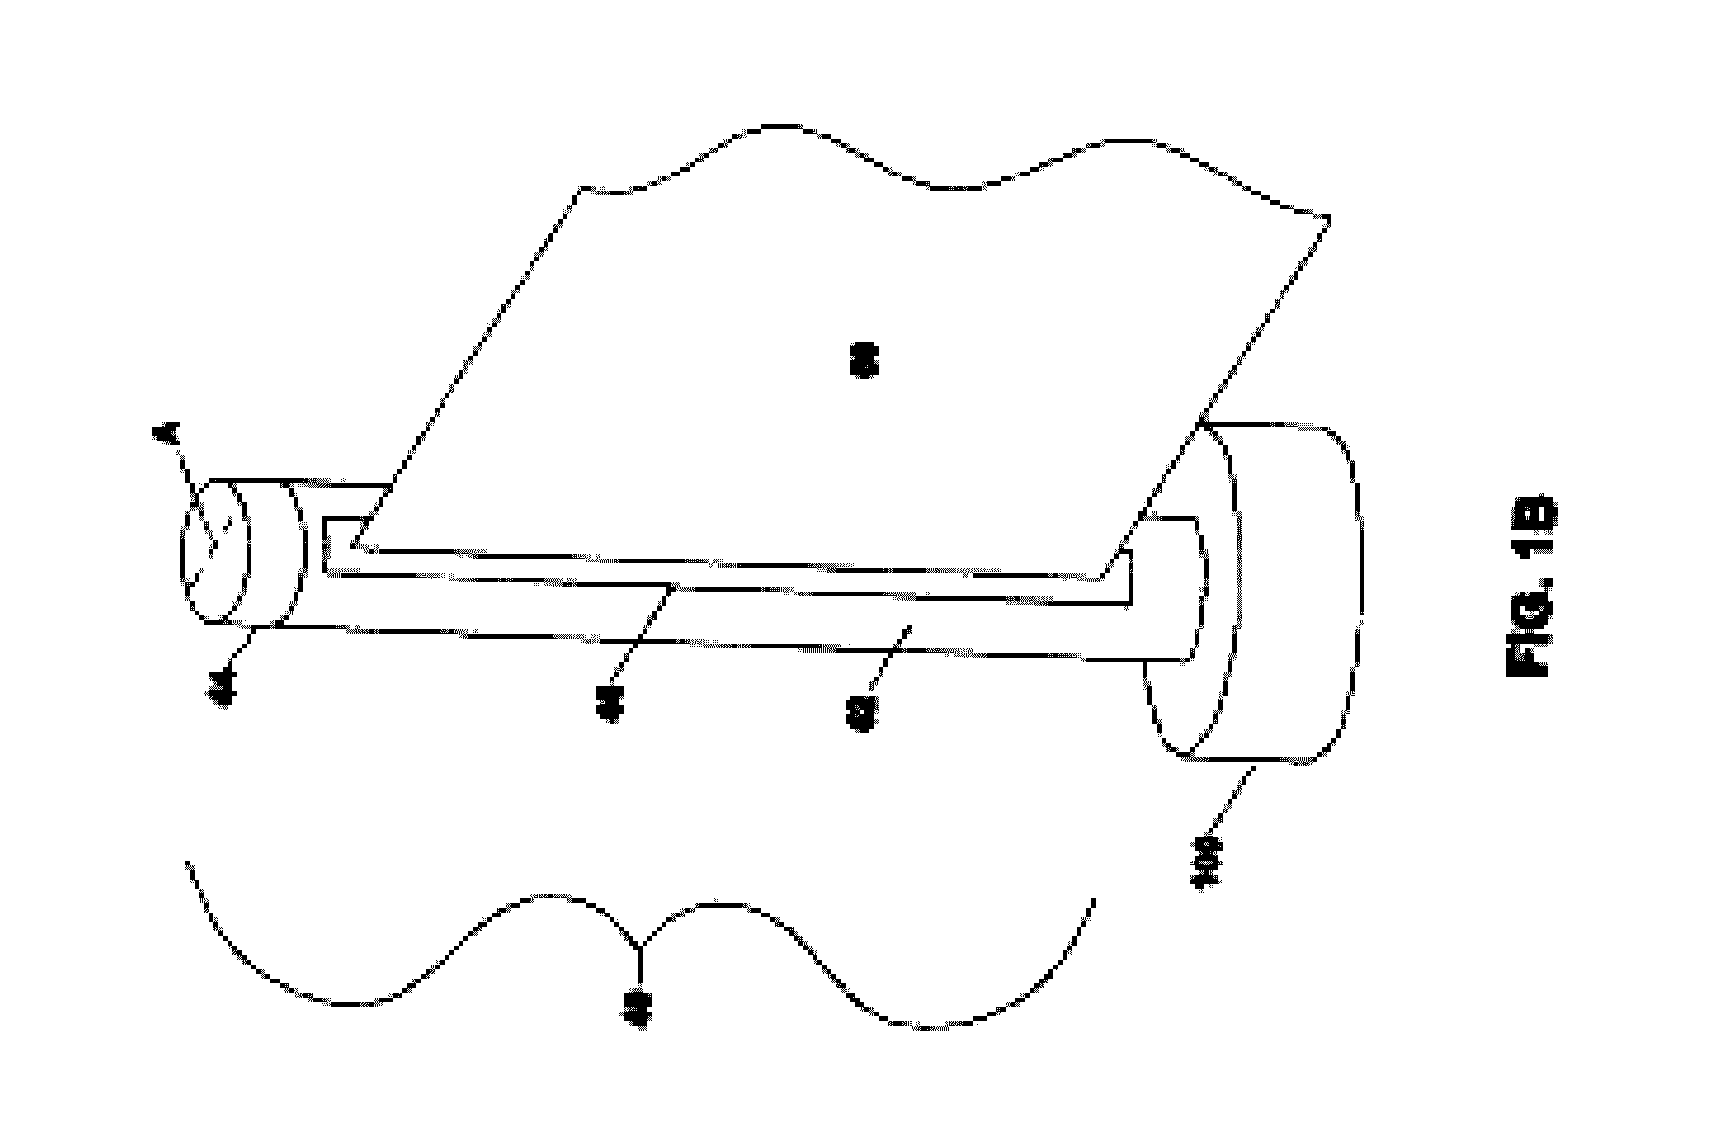 Safety apparatus combination, associated methods, and kits